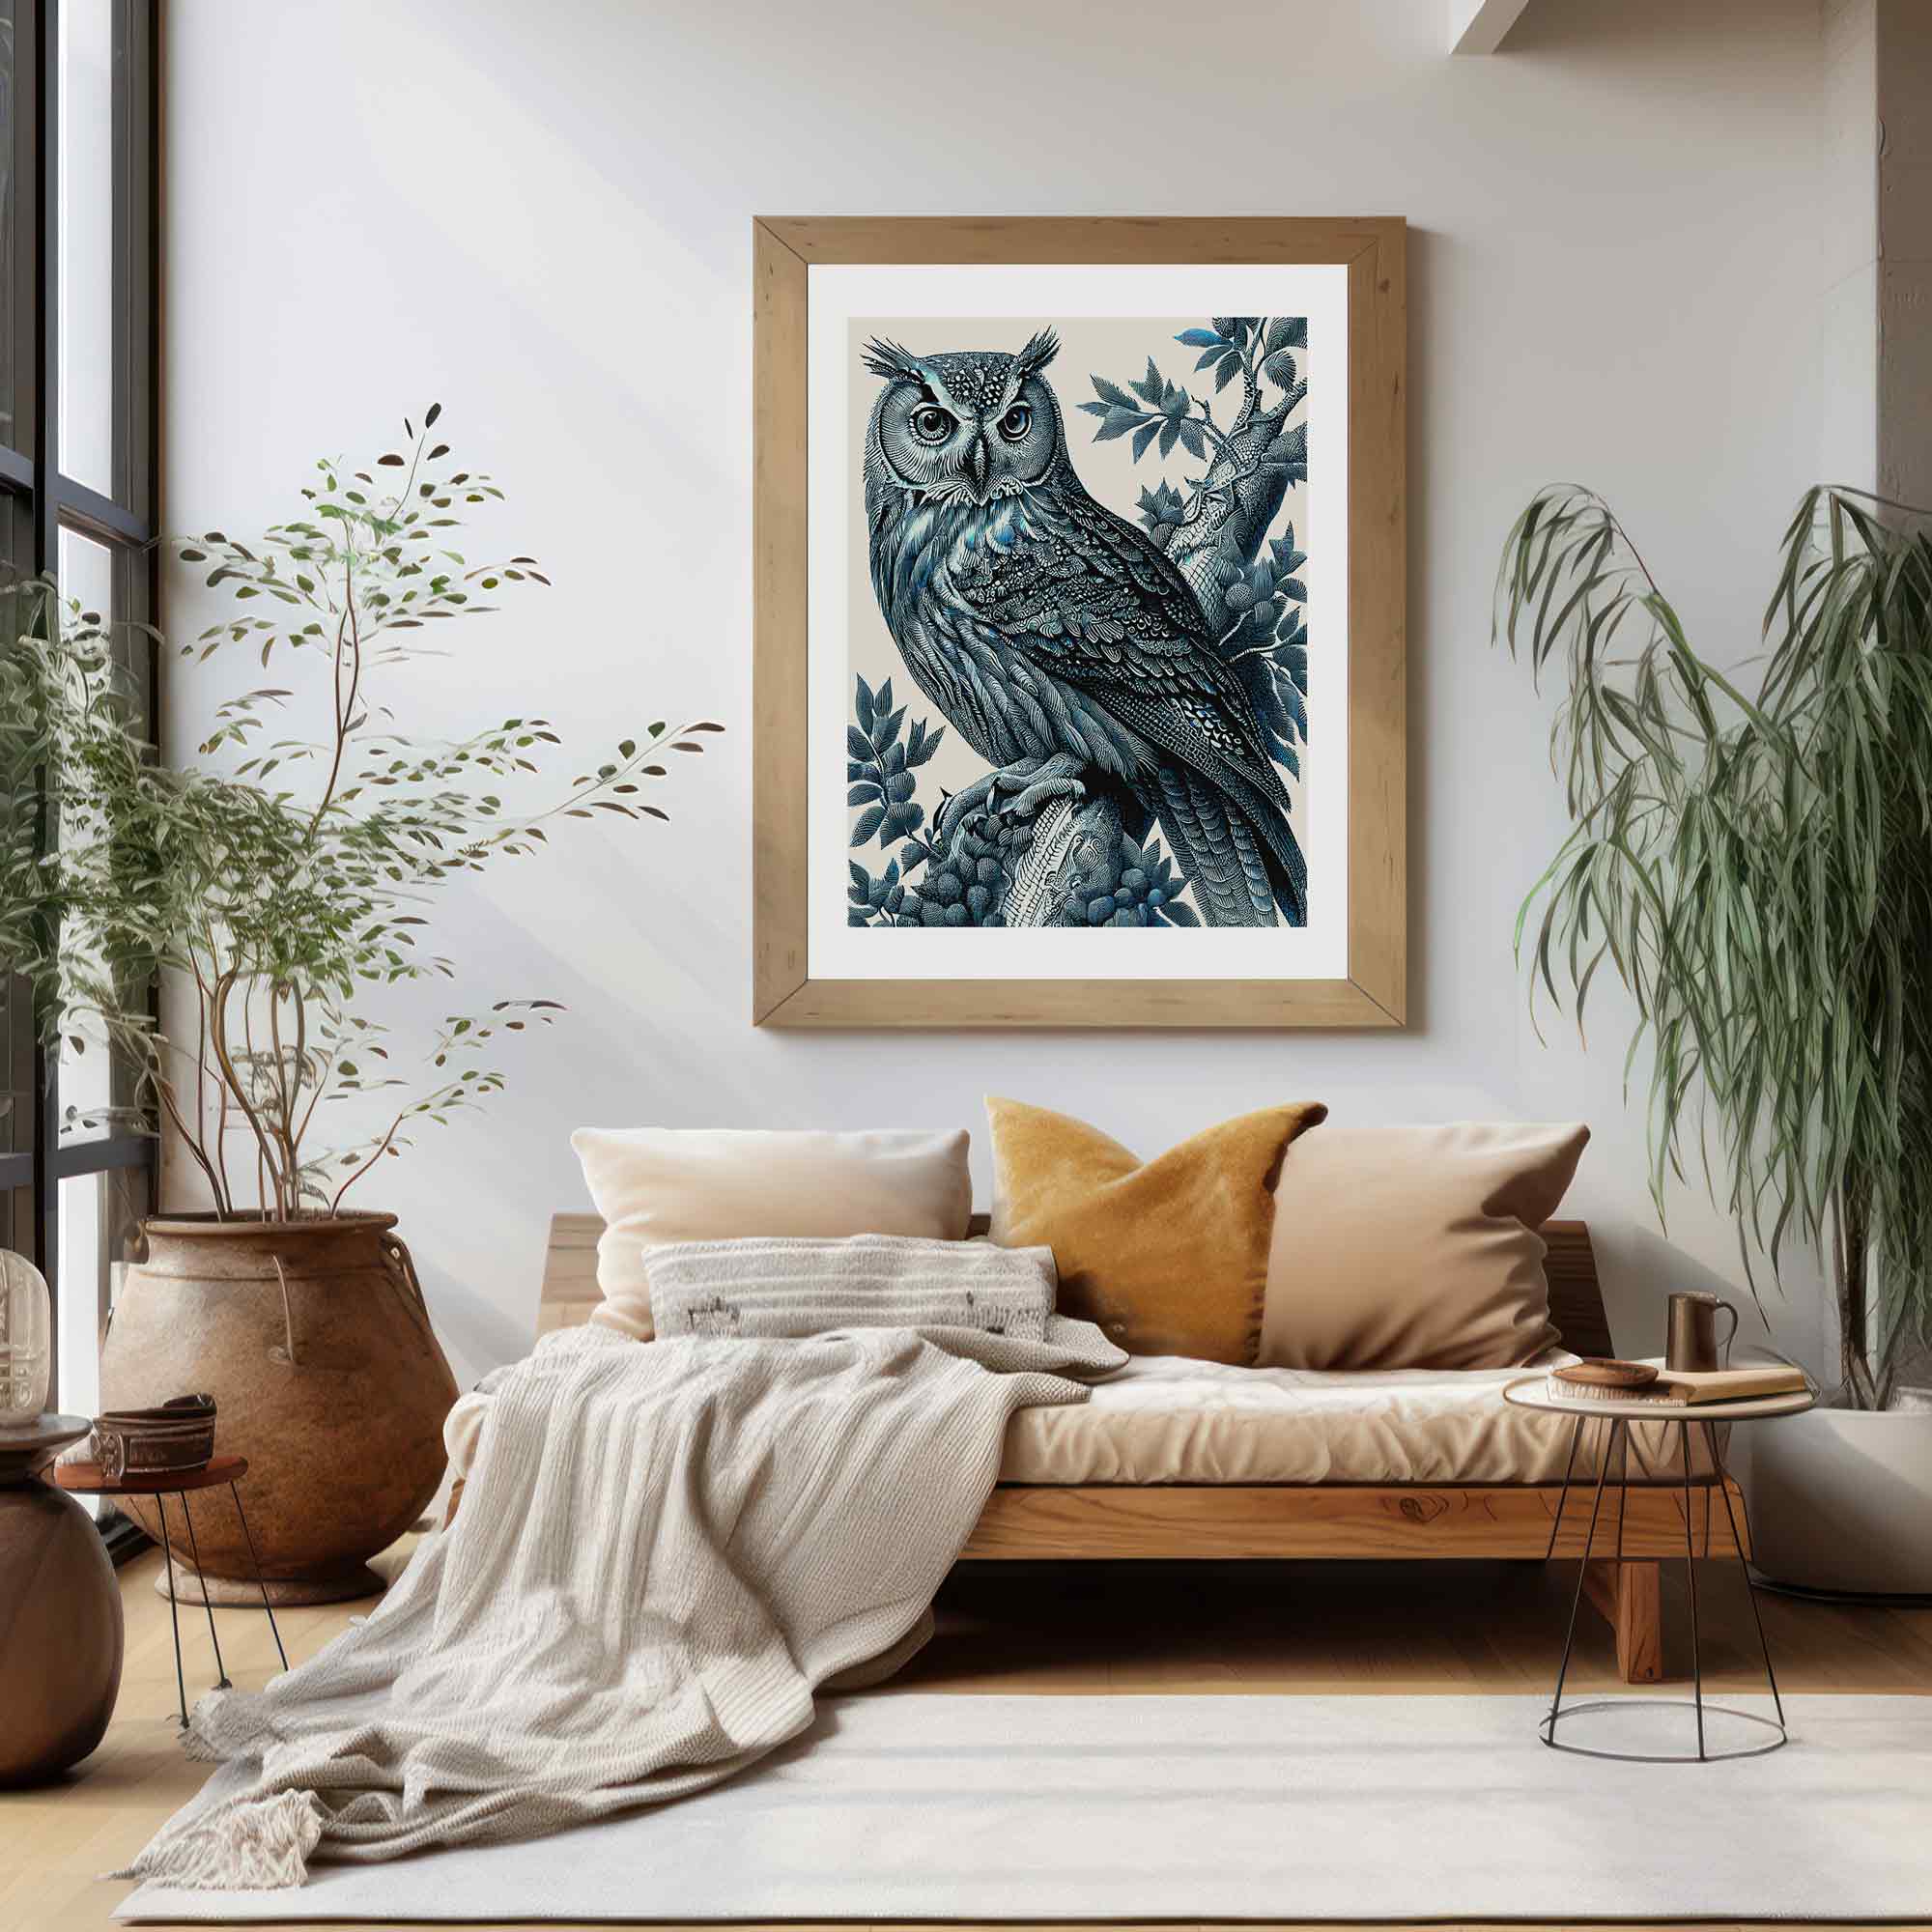 Beautiful black and blue etched style illustration of a owl in a stunning garden room